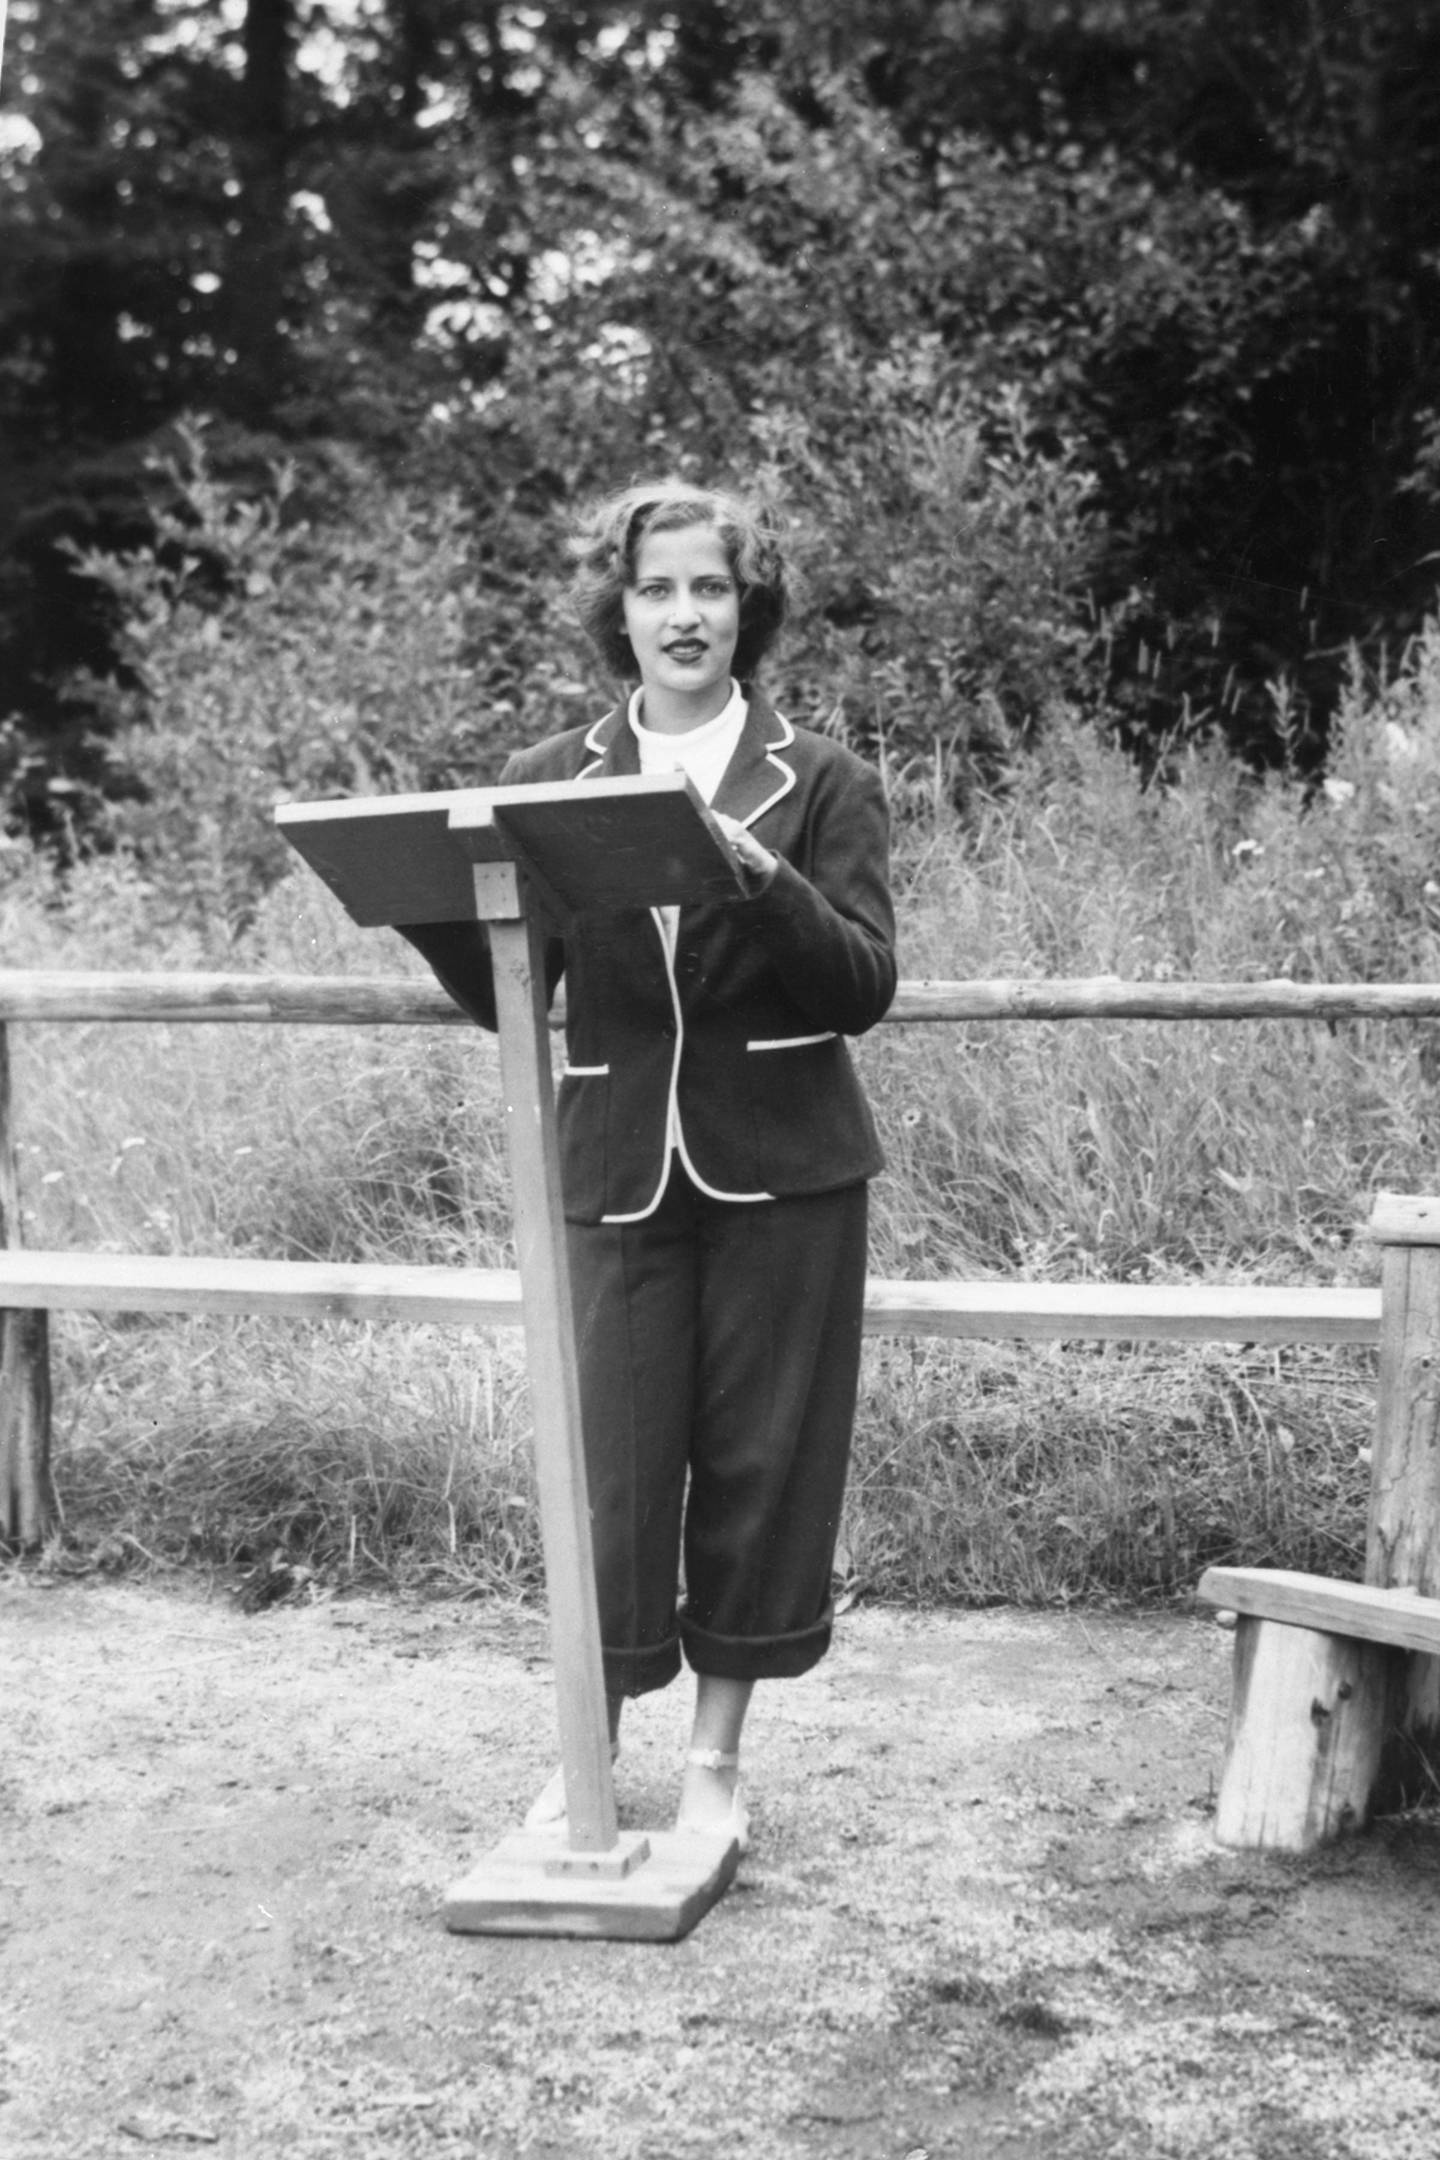 This image provided by the Supreme Court shows Ruth Bader, age age 15 in 1948, giving a sermon as the camp rabbi at Che-Na-Wah in Minerva, N.Y. Supreme Court Justice Ruth Bader Ginsburg died at her home in Washington, on Sept. 18, 2020, the Supreme Court announced. (Collection of the Supreme Court of the United States via AP)